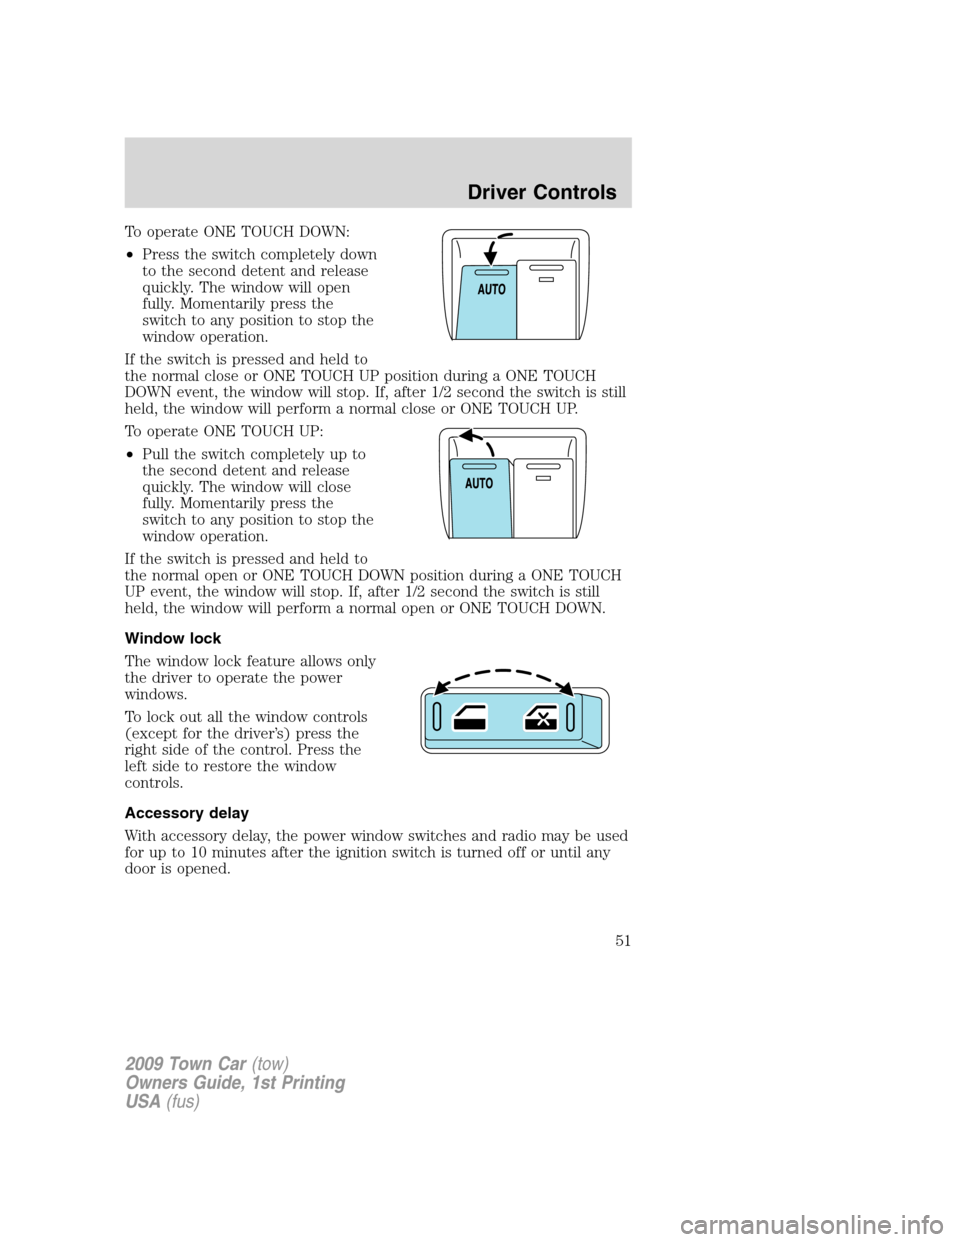 LINCOLN TOWN CAR 2009 Workshop Manual To operate ONE TOUCH DOWN:
•Press the switch completely down
to the second detent and release
quickly. The window will open
fully. Momentarily press the
switch to any position to stop the
window ope